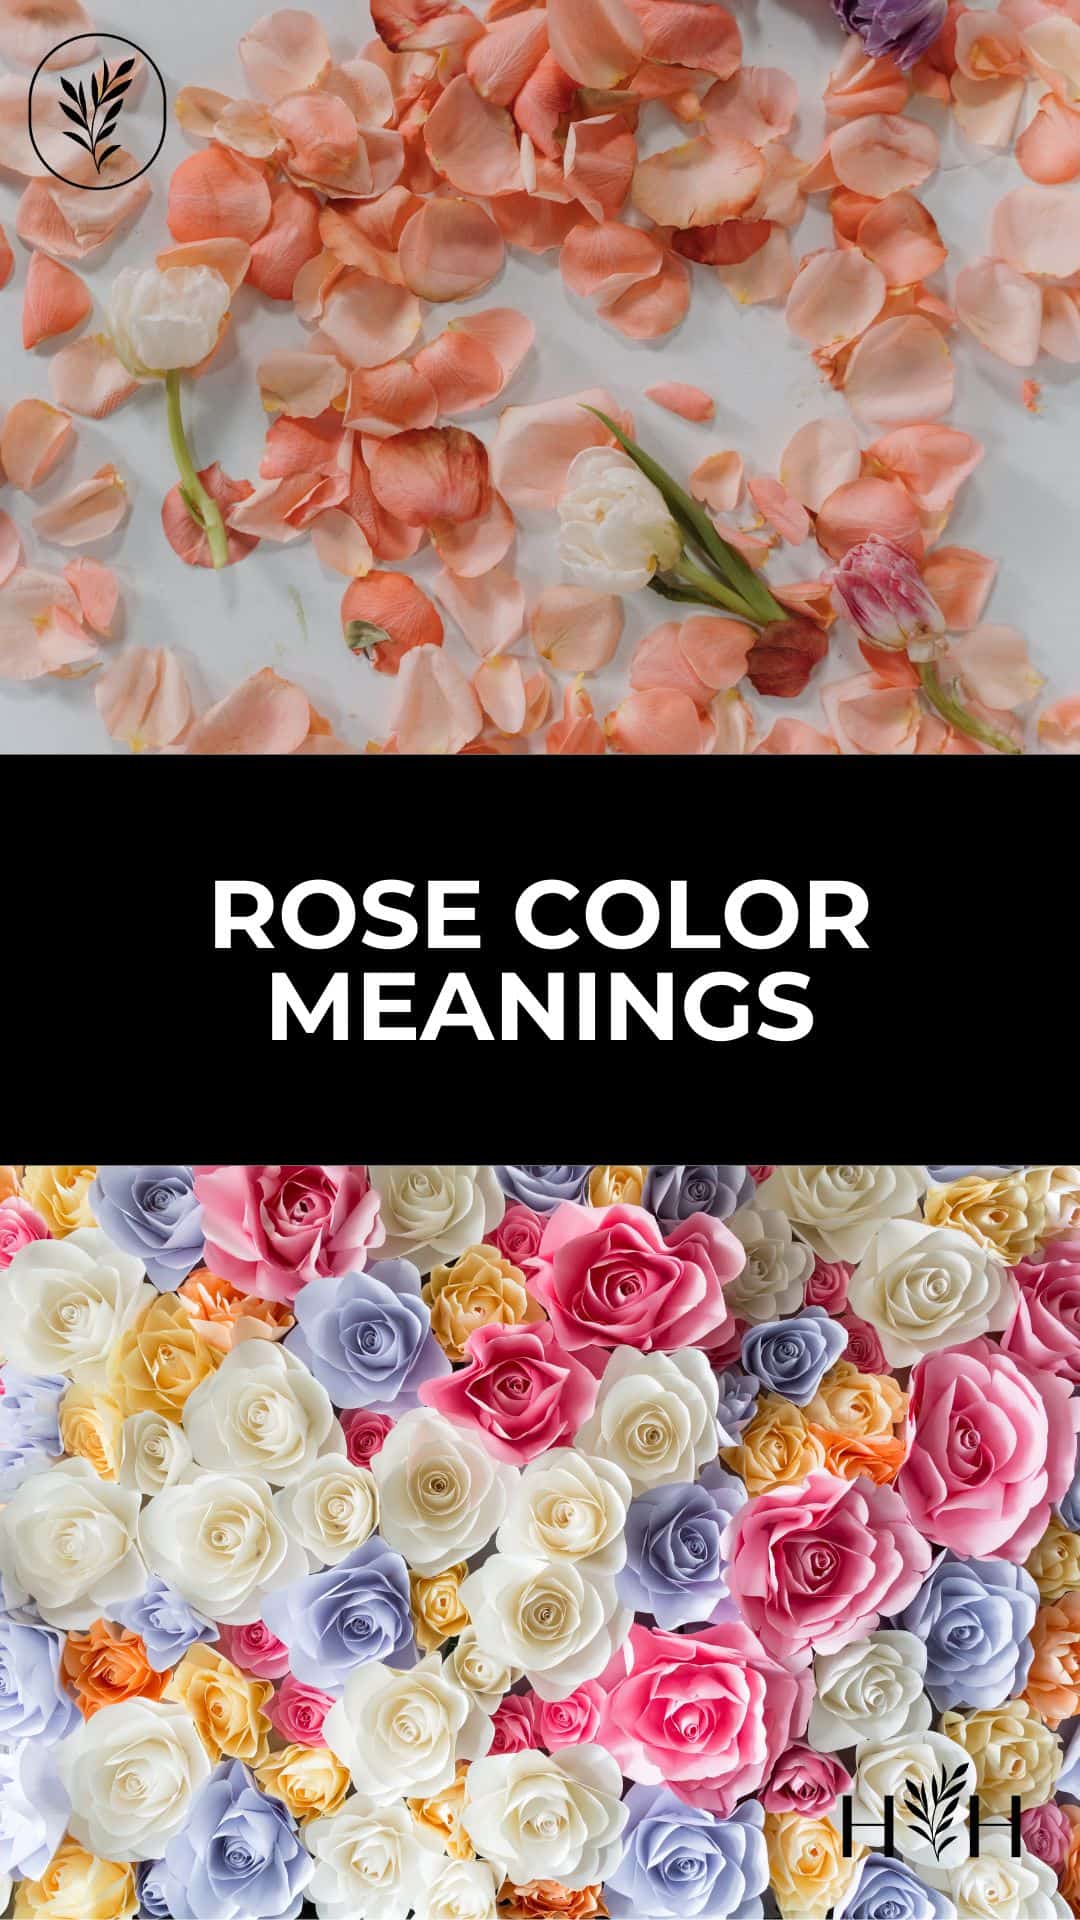 Rose color meanings via @home4theharvest